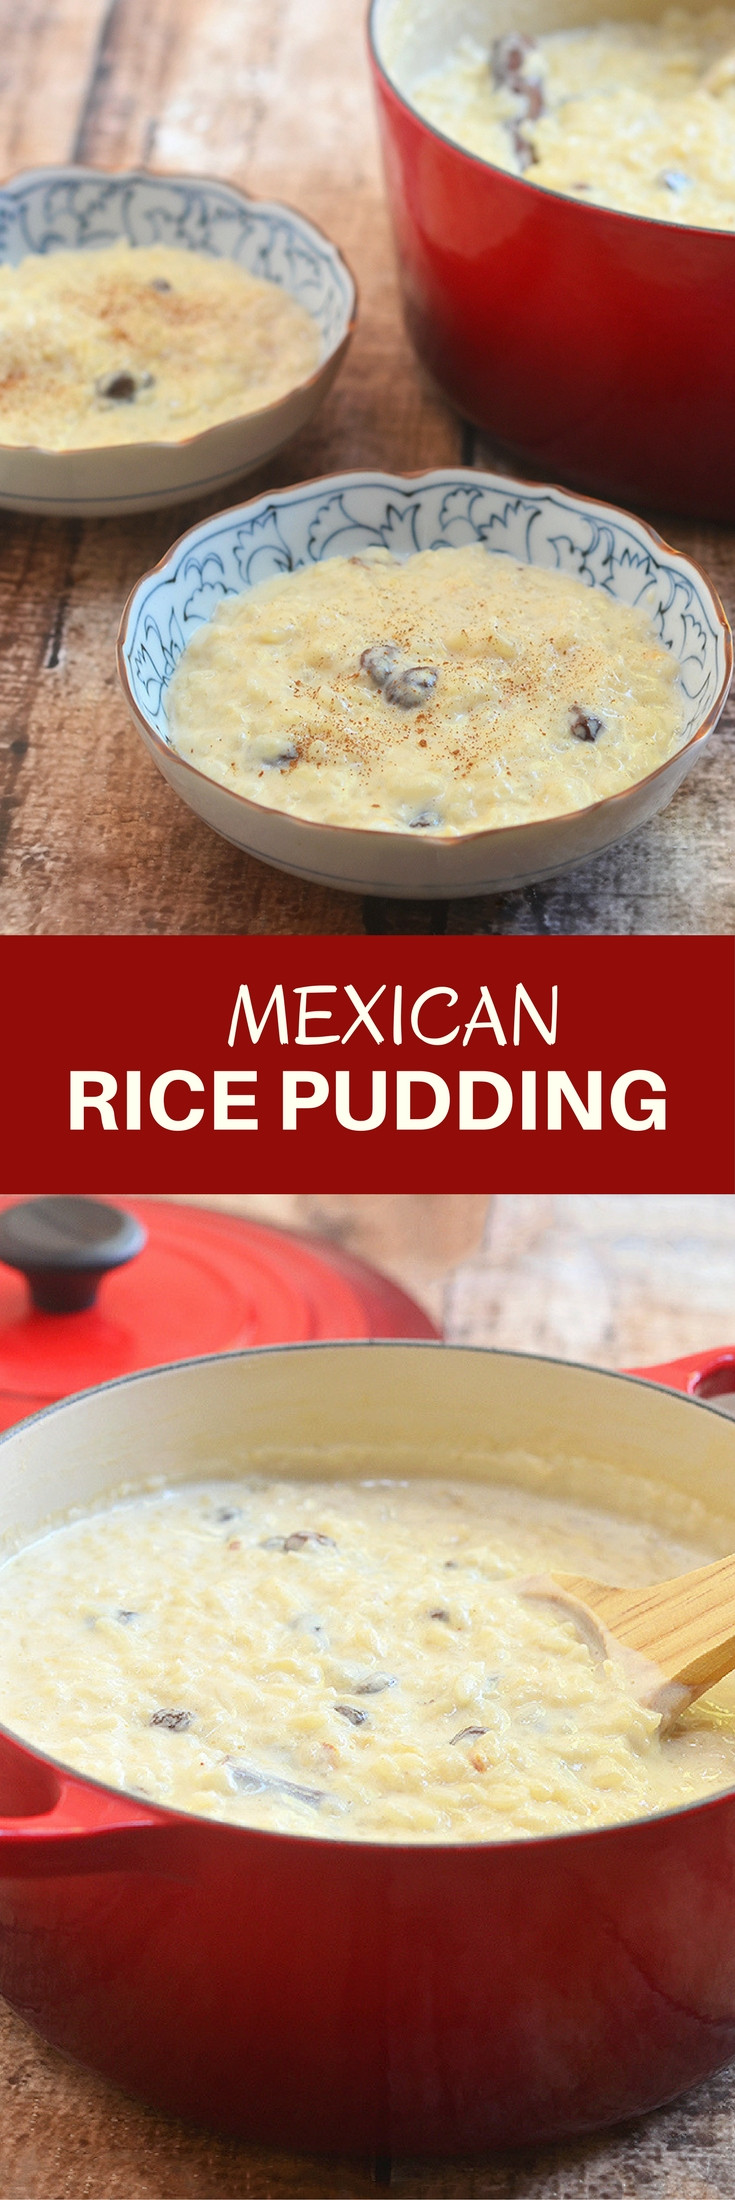 Rice Pudding Mexican
 Mexican Rice Pudding ion Rings & Things